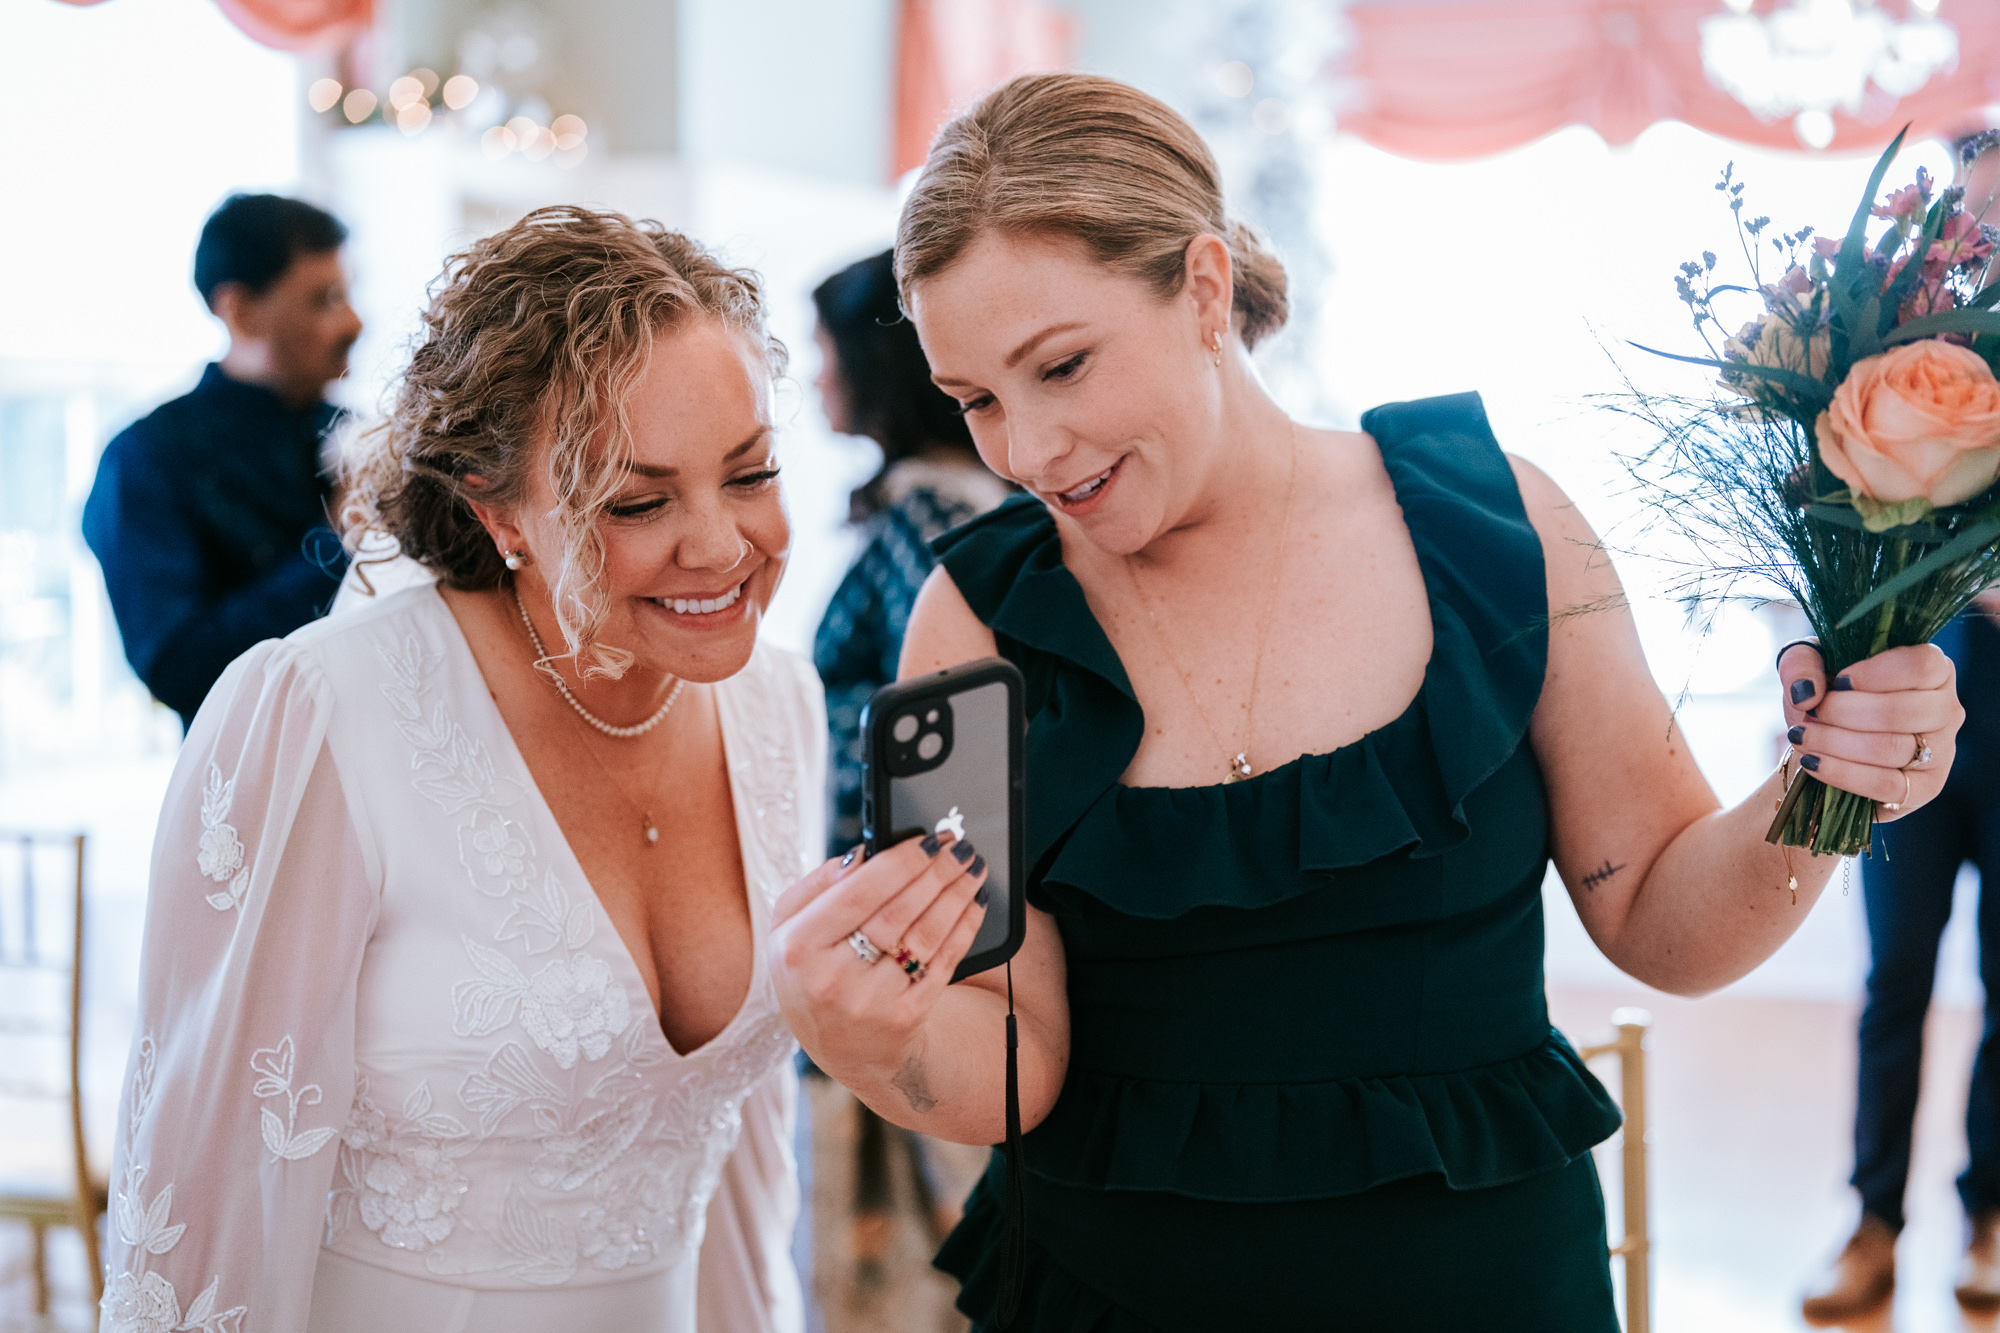 bride and her sister on the phone together talking to wedding guests who couldn't attend the wedding day